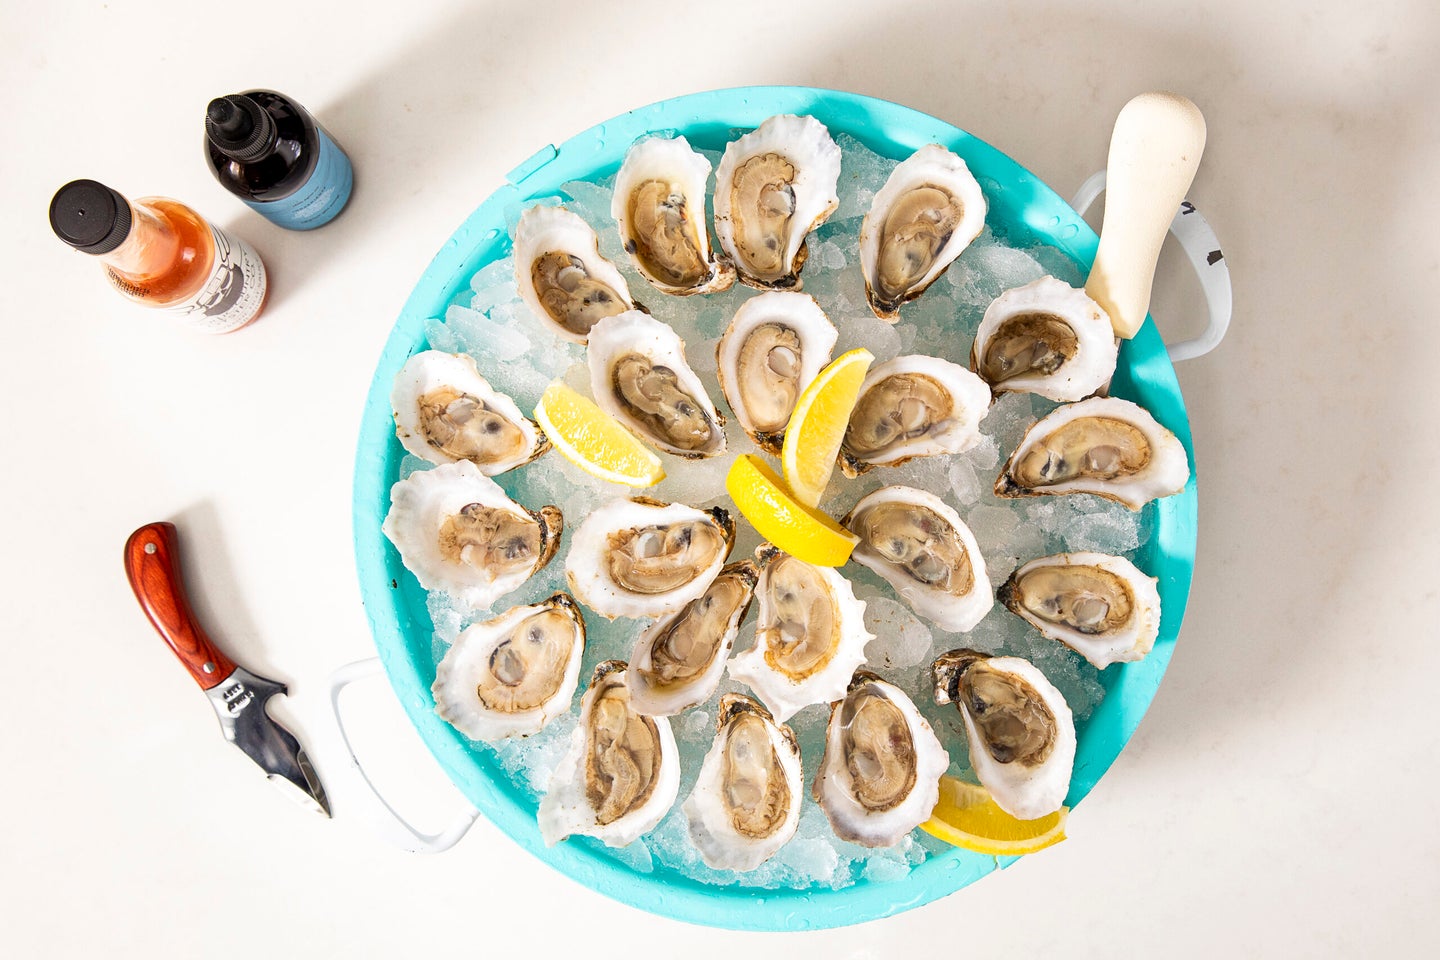 A platter of Lowcountry oysters